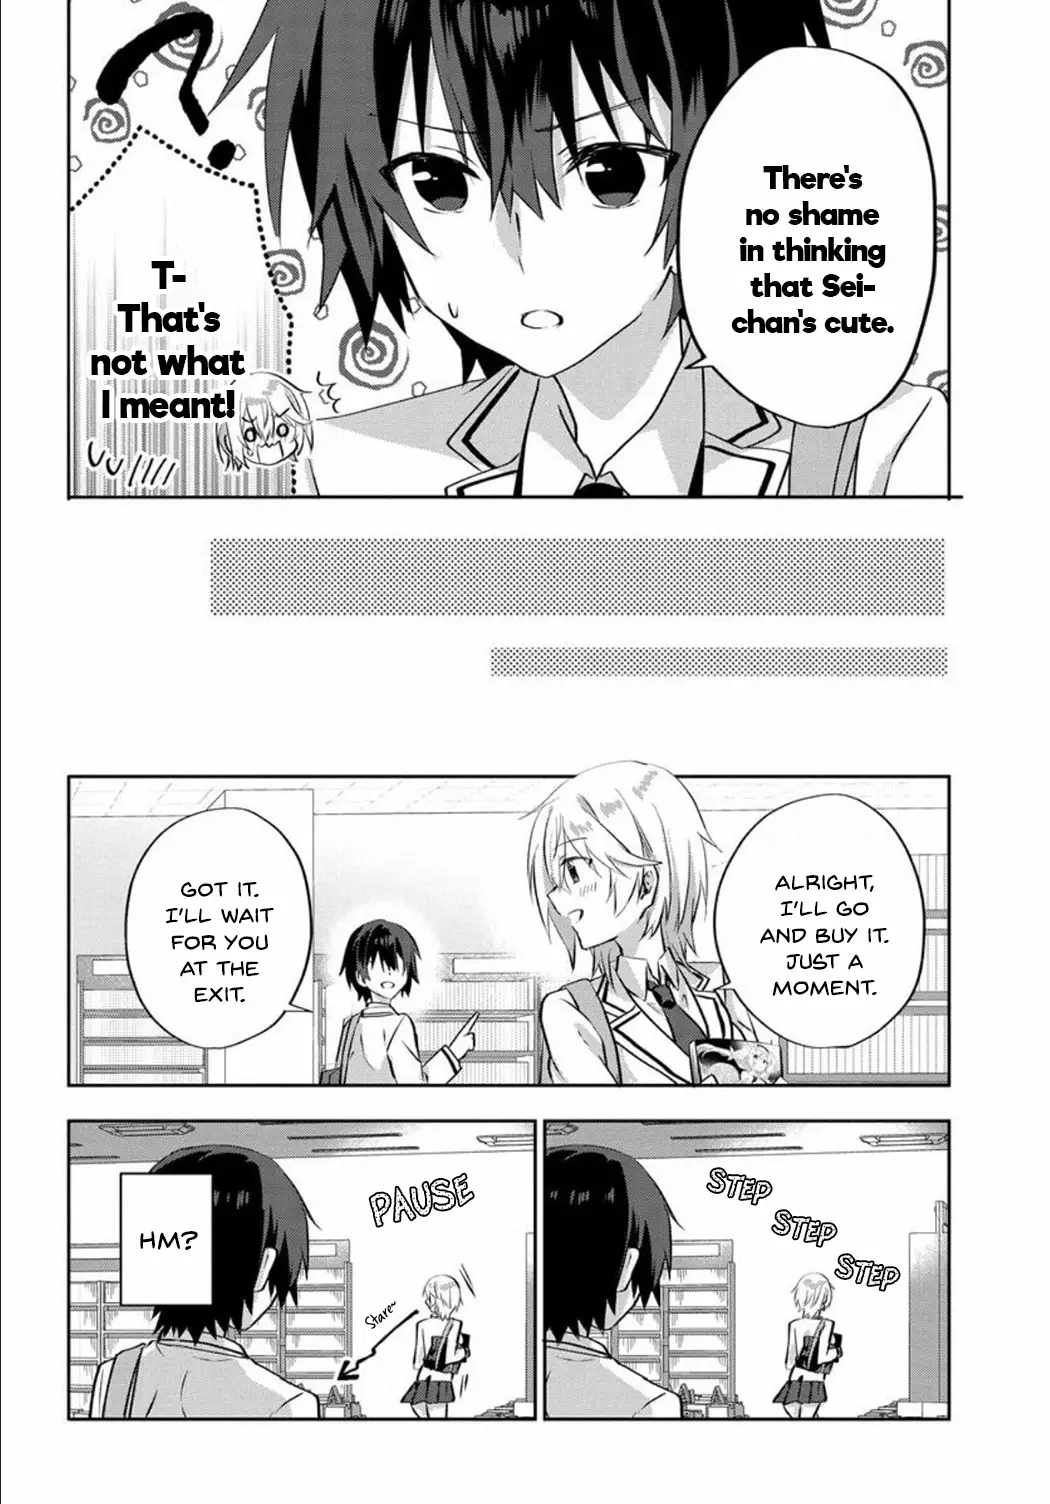 Since I’Ve Entered The World Of Romantic Comedy Manga, I’Ll Do My Best To Make The Losing Heroine Happy - 5.1 page 6-7e5d7fd0